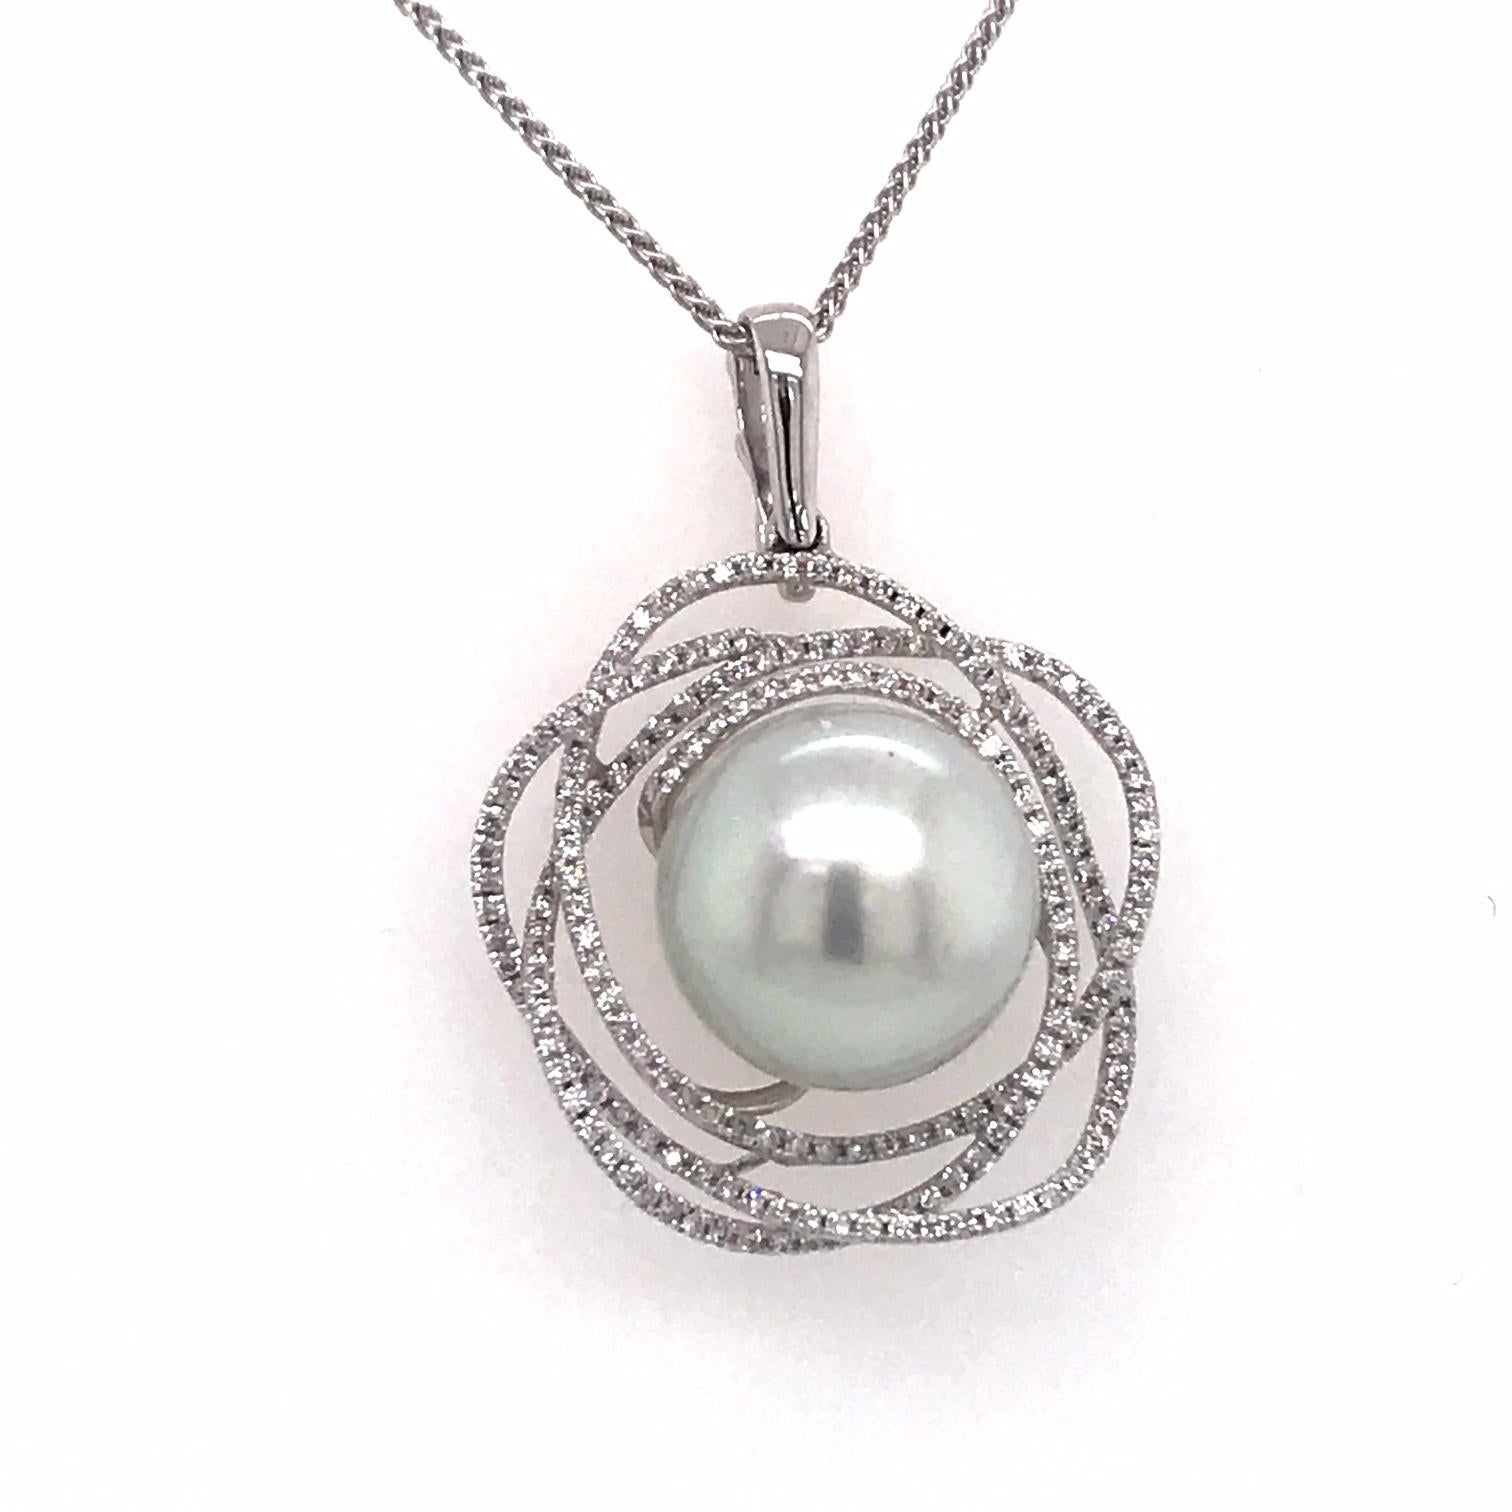 18K White gold pendant featuring one South Sea Pearl measuring 13-14 mm flanked with 186 round brilliants weighing 0.68 carats. 
Color G-H 
Clarity SI

Pearl can be changed to a Pink, Golden or Tahitian Pearl upon request. Price subject to change.